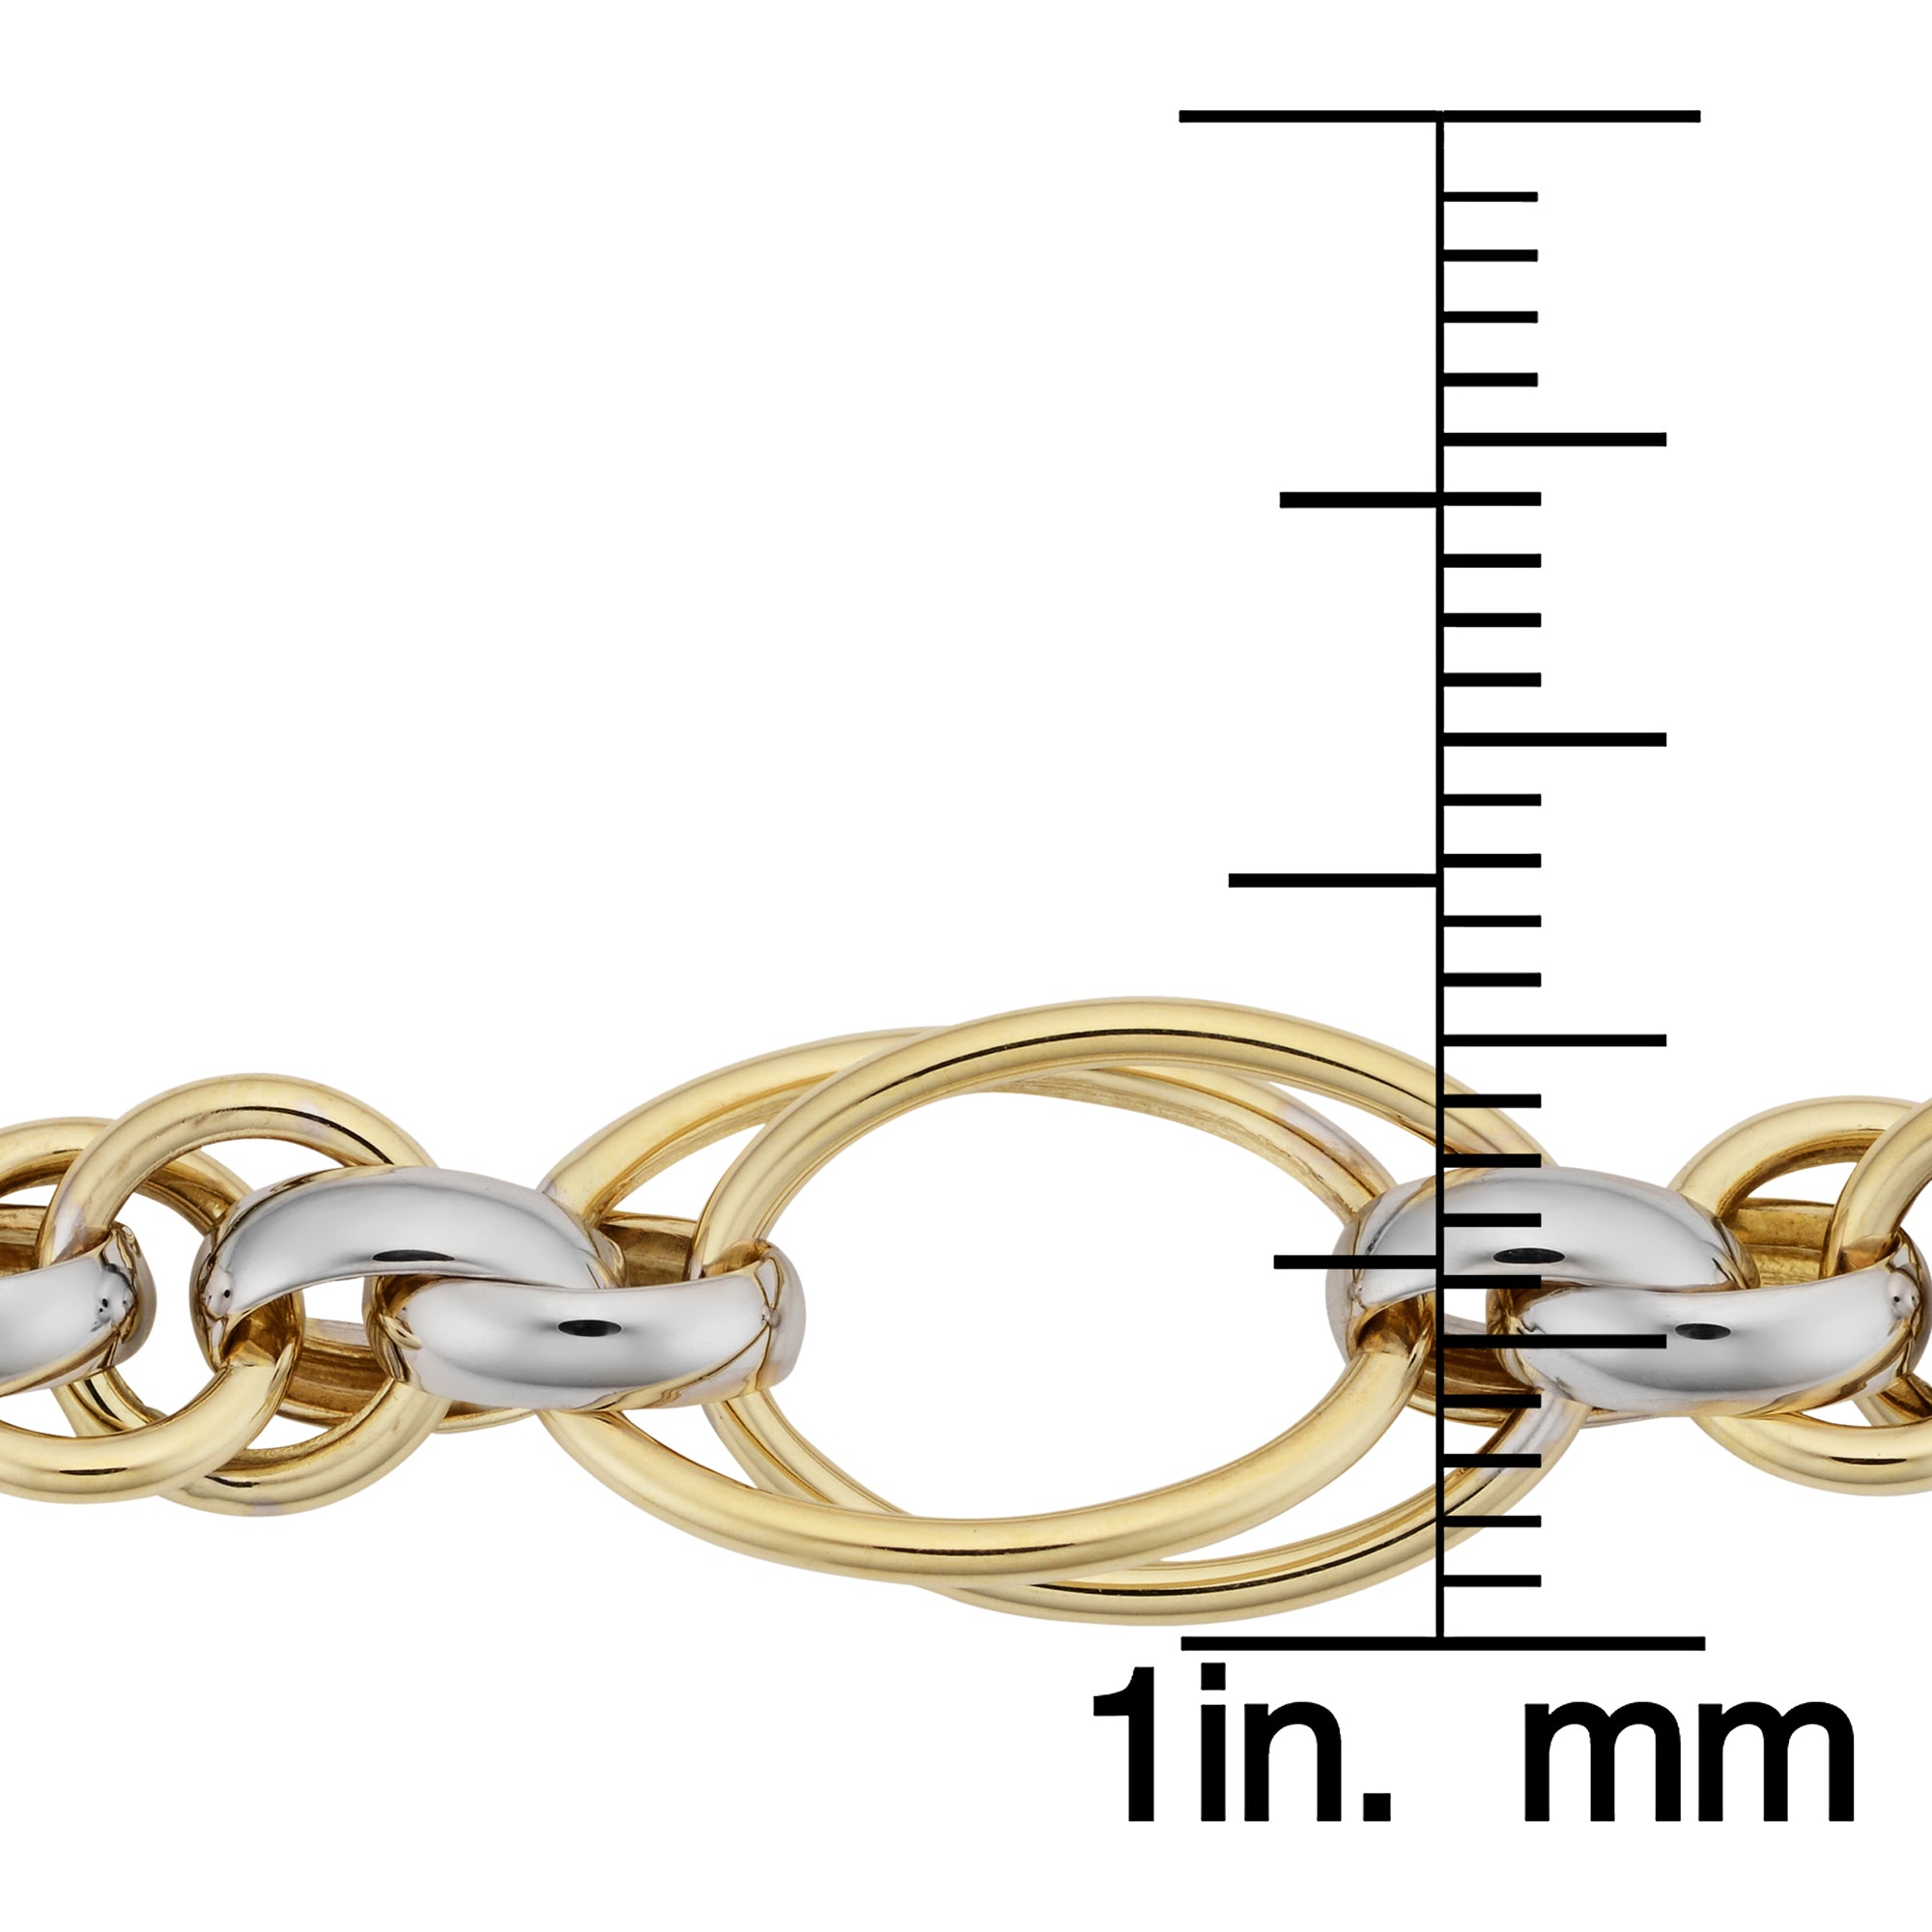 14k Two Tone Gold Double Oval Link Womens Bracelet, 7.5" fine designer jewelry for men and women